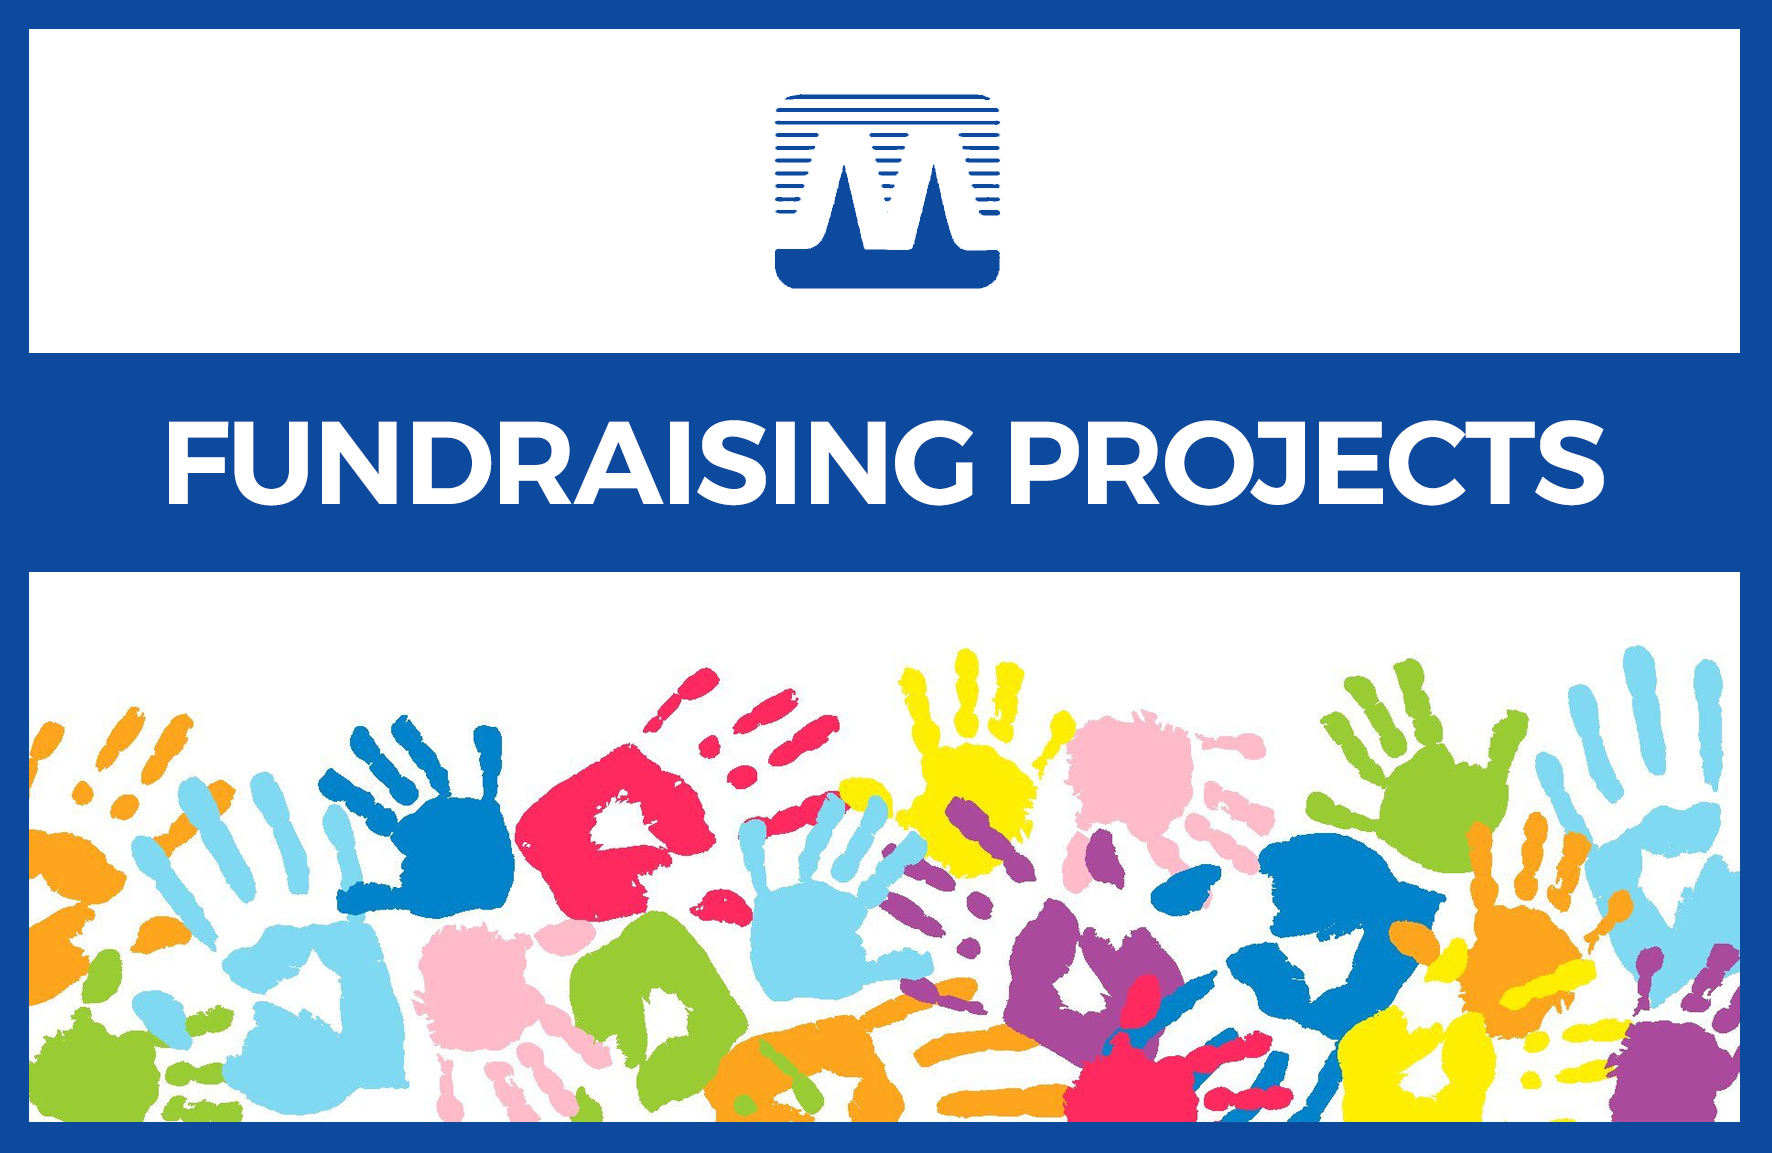 Fundraising projects at Melamaster